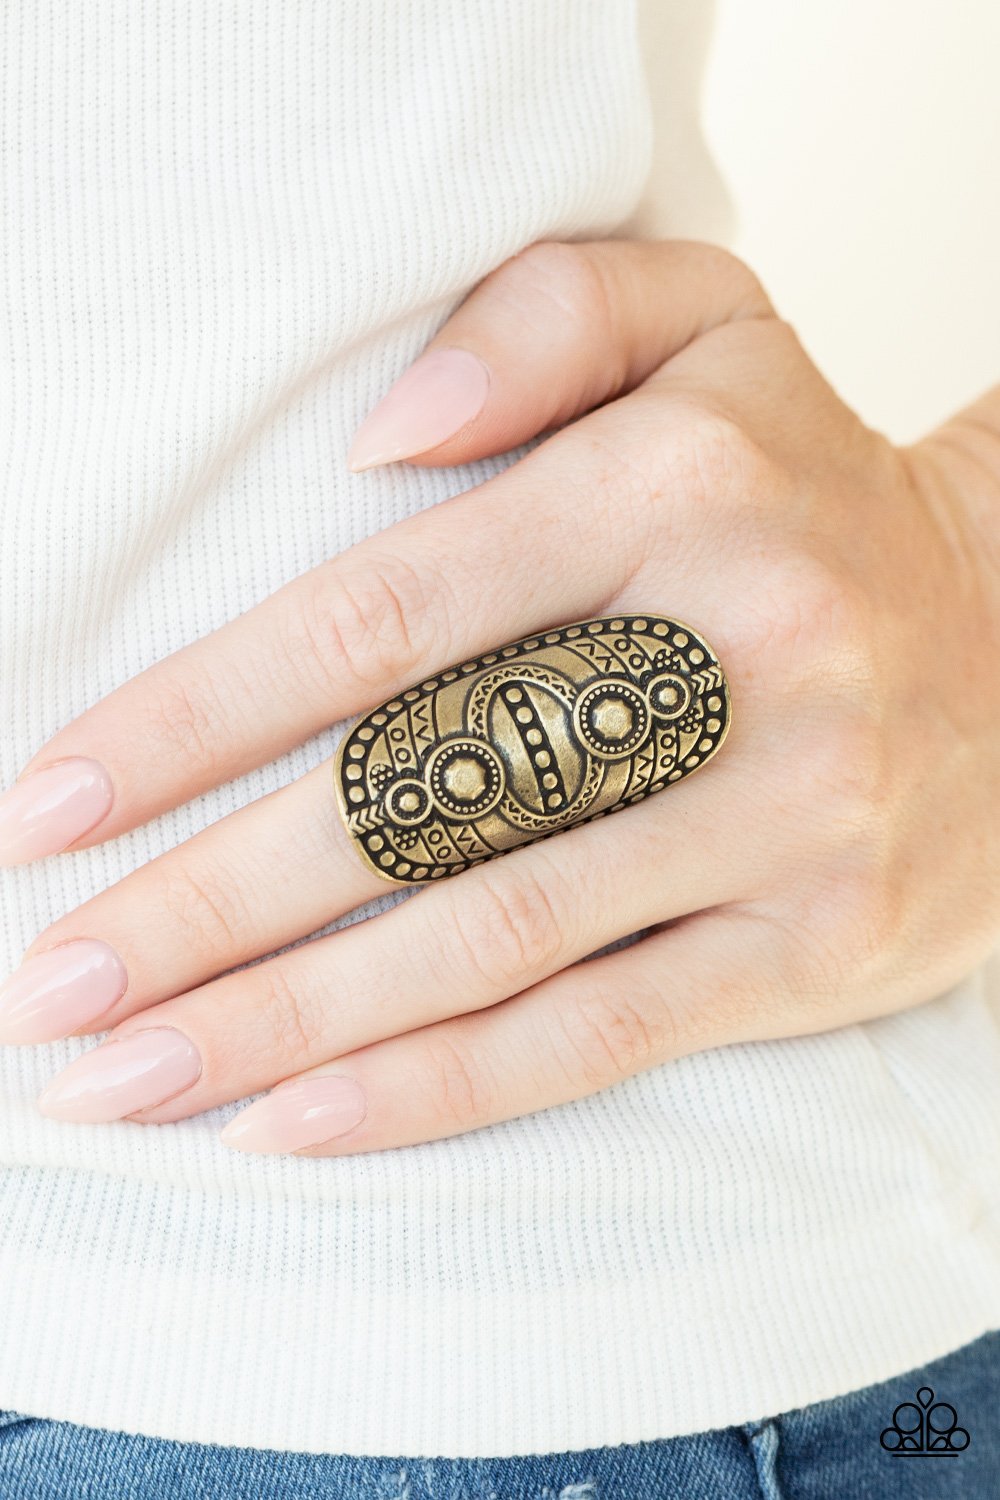 &lt;p&gt;Studded and stamped in tribal inspired textures, an oversized brass frame folds around the finger for a rustically authentic look. Features a stretchy band for a flexible fit. &lt;/p&gt;  
 

 &lt;p&gt; &lt;i&gt; Sold as one individual ring.
 &lt;/i&gt;&lt;/p&gt;
 

&lt;h5&gt;Paparazzi Accessories • $5 Jewelry&lt;/h5&gt;